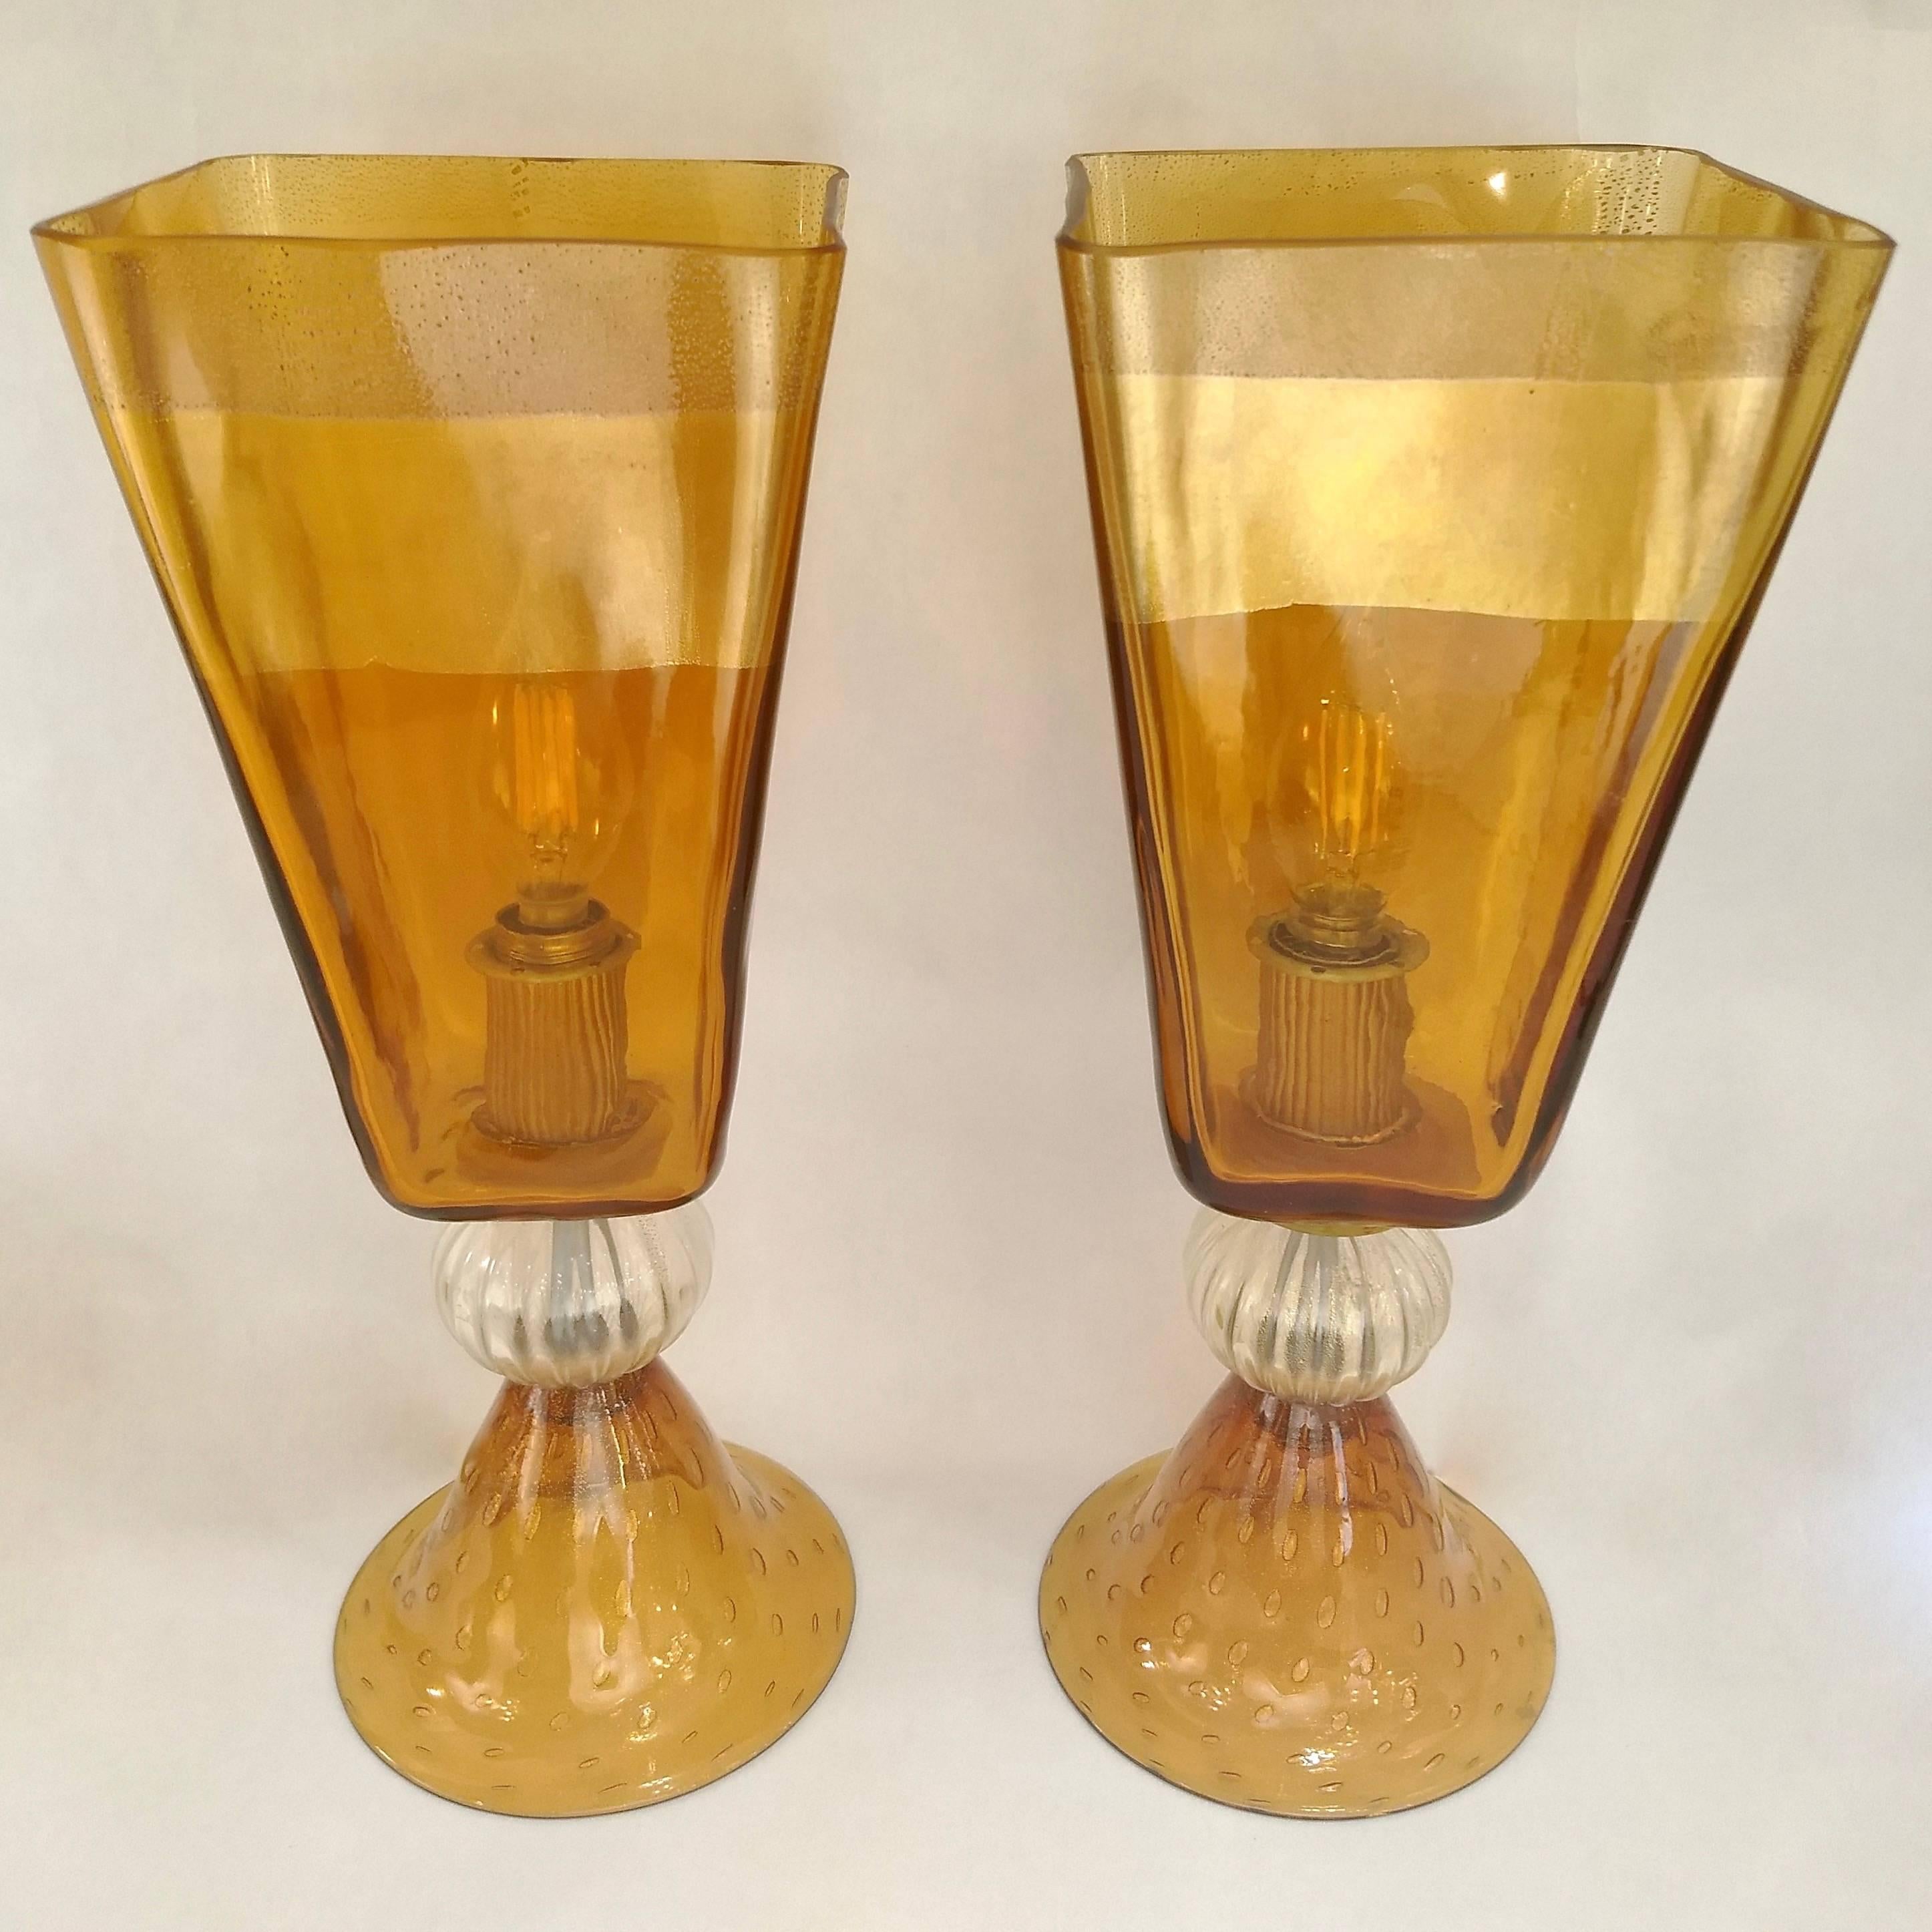 A delightful vintage pair of Italian design table lamps, ideal for nightstands or desk use, high quality of execution in blown Murano glass worked with pure 24-karat gold in the amber glass body distributed with varied concentration to produce a